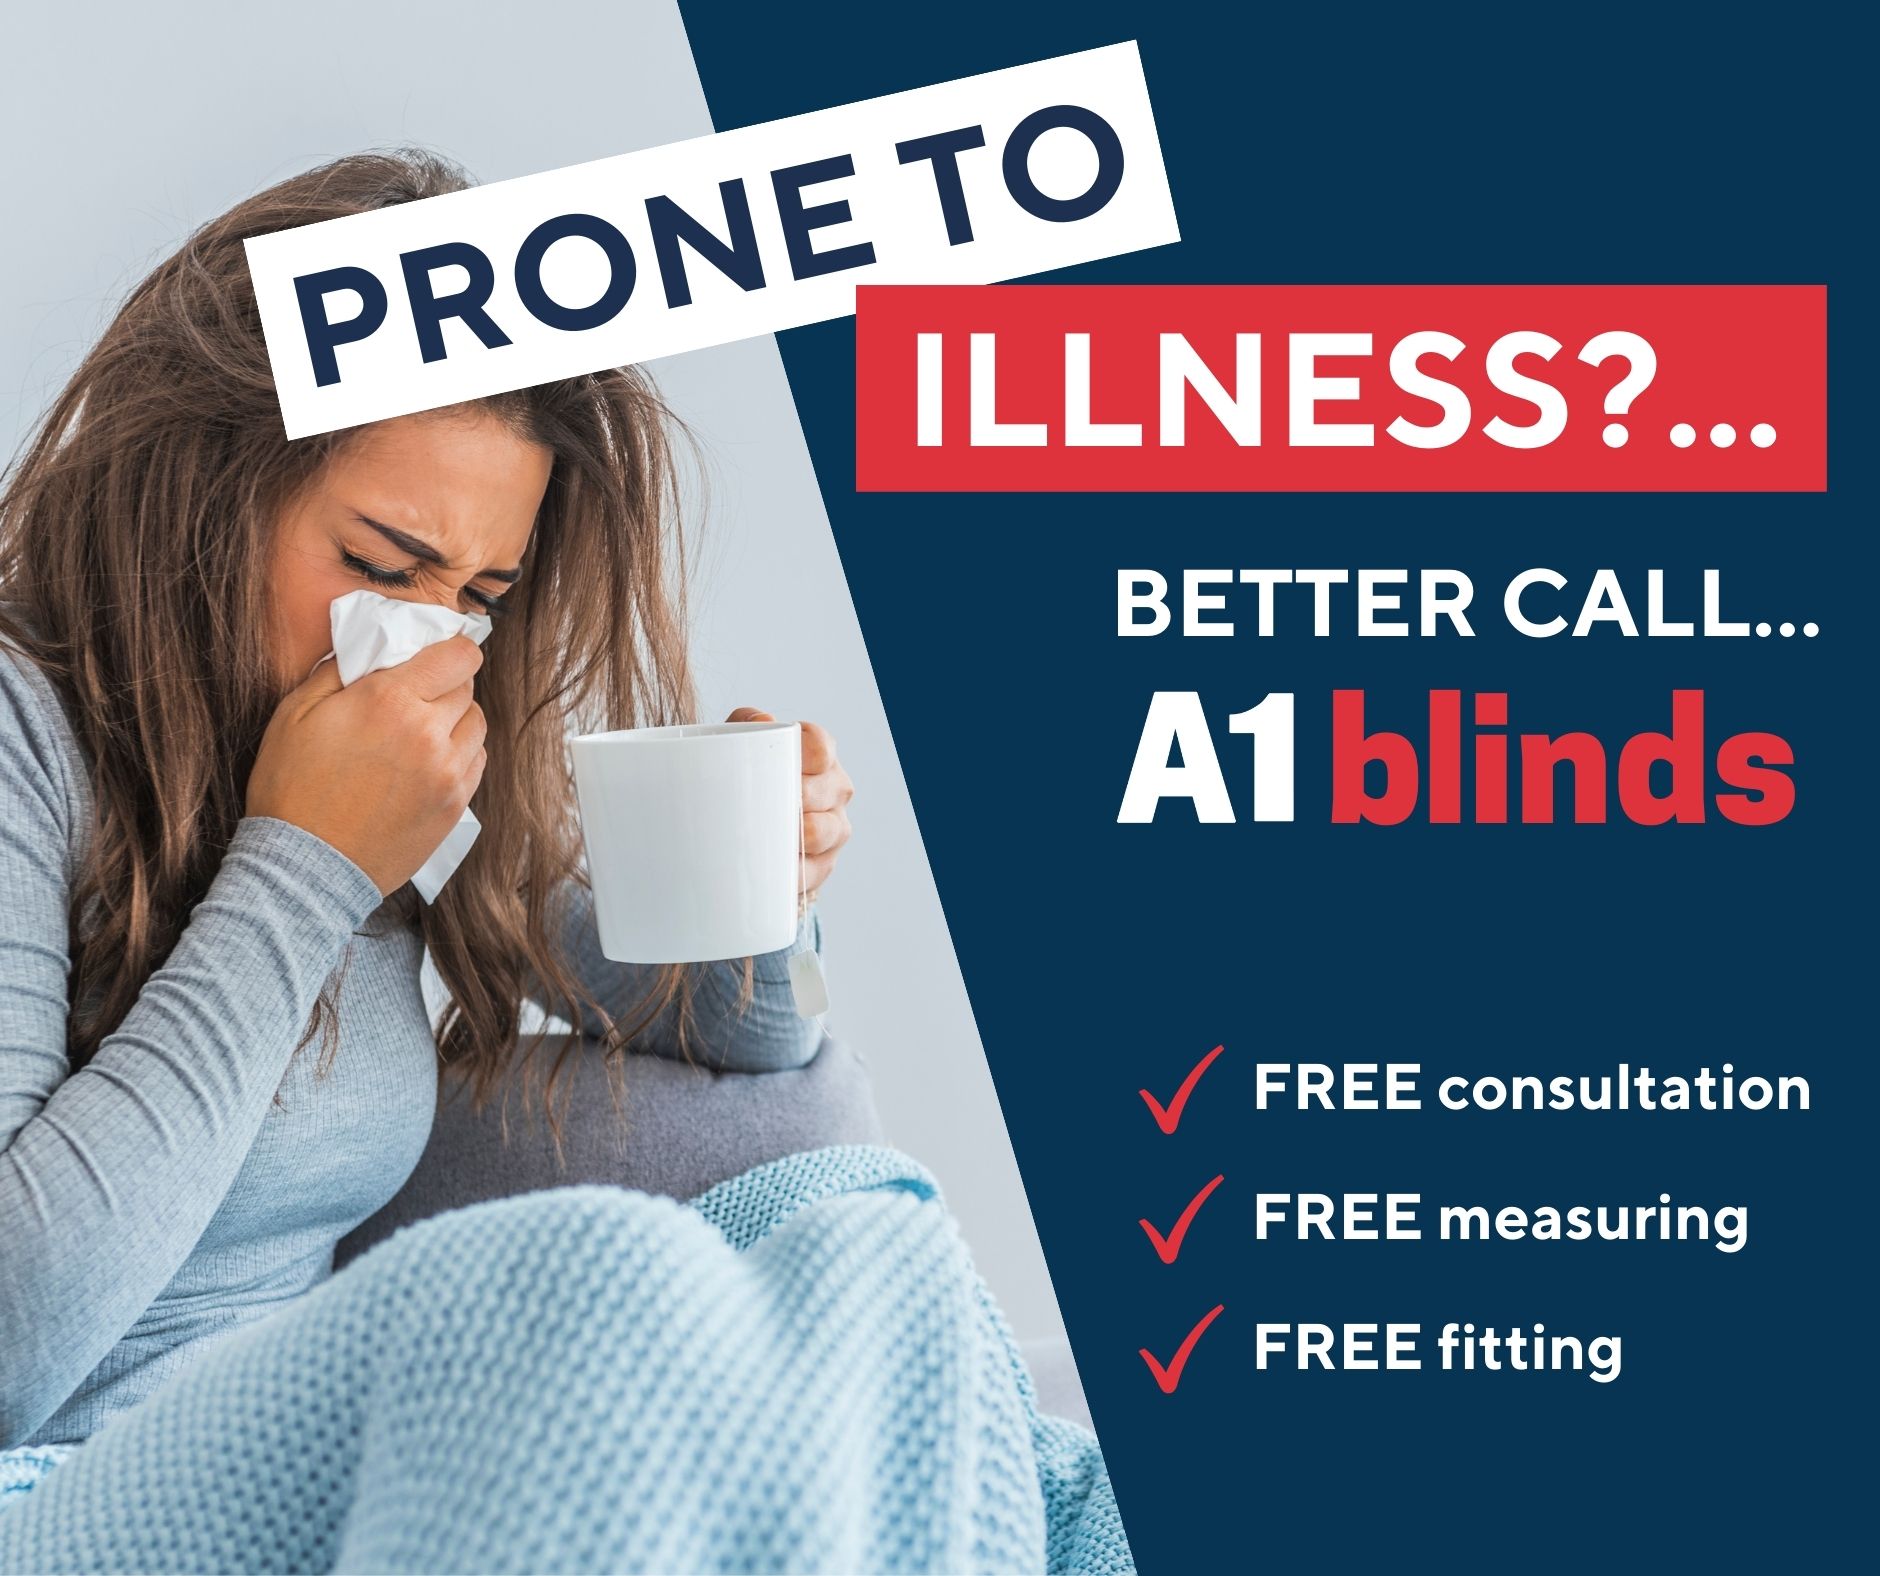 Prone To Illness? Better Call A1 Blinds!